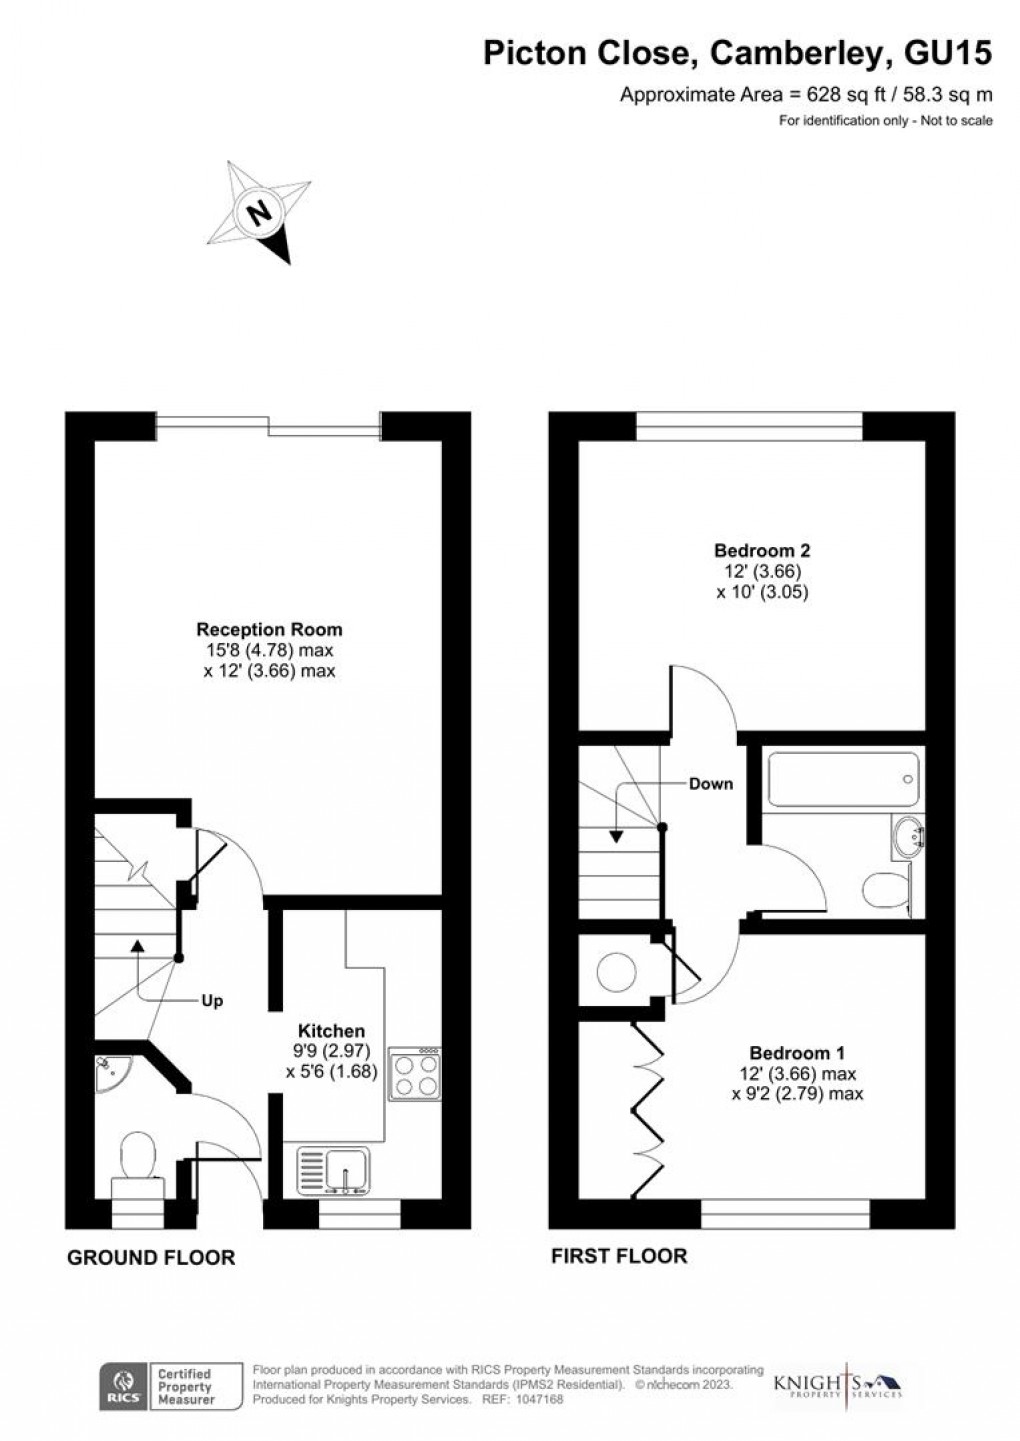 Floorplan for Picton Close, Camberley